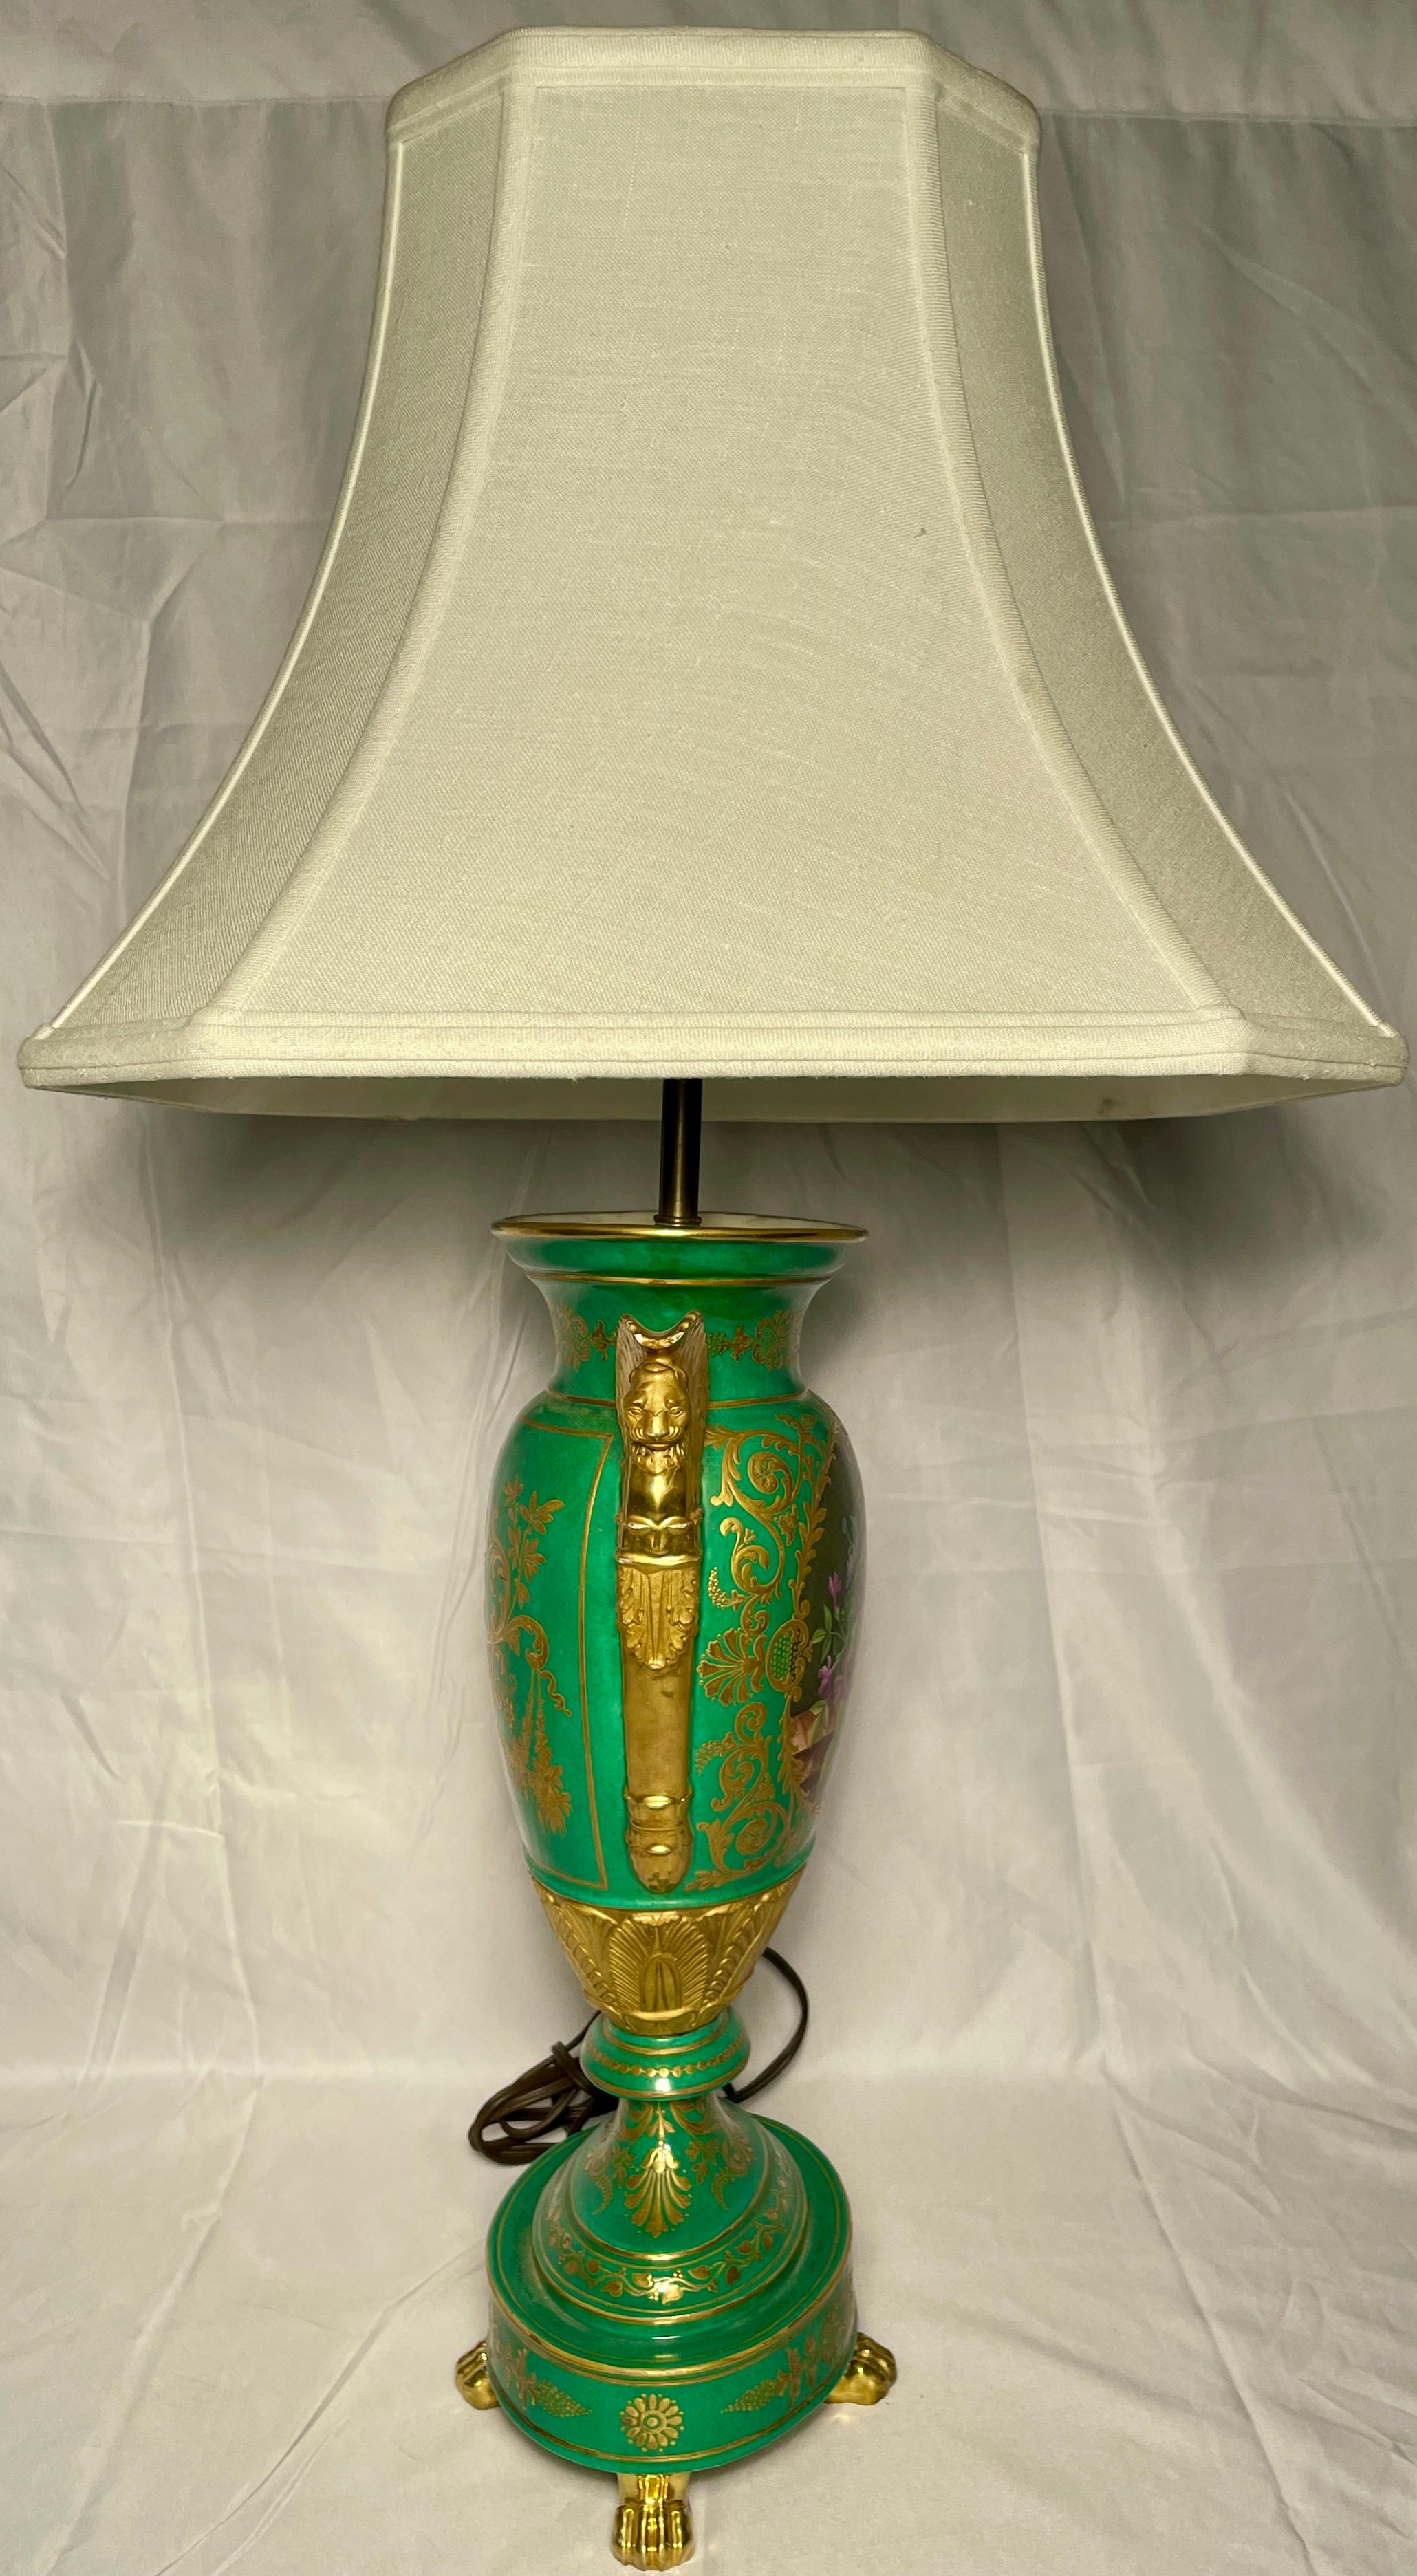 Antique 19th Century French Green and Gold Painted Porcelain Lamp, Circa 1860 For Sale 5